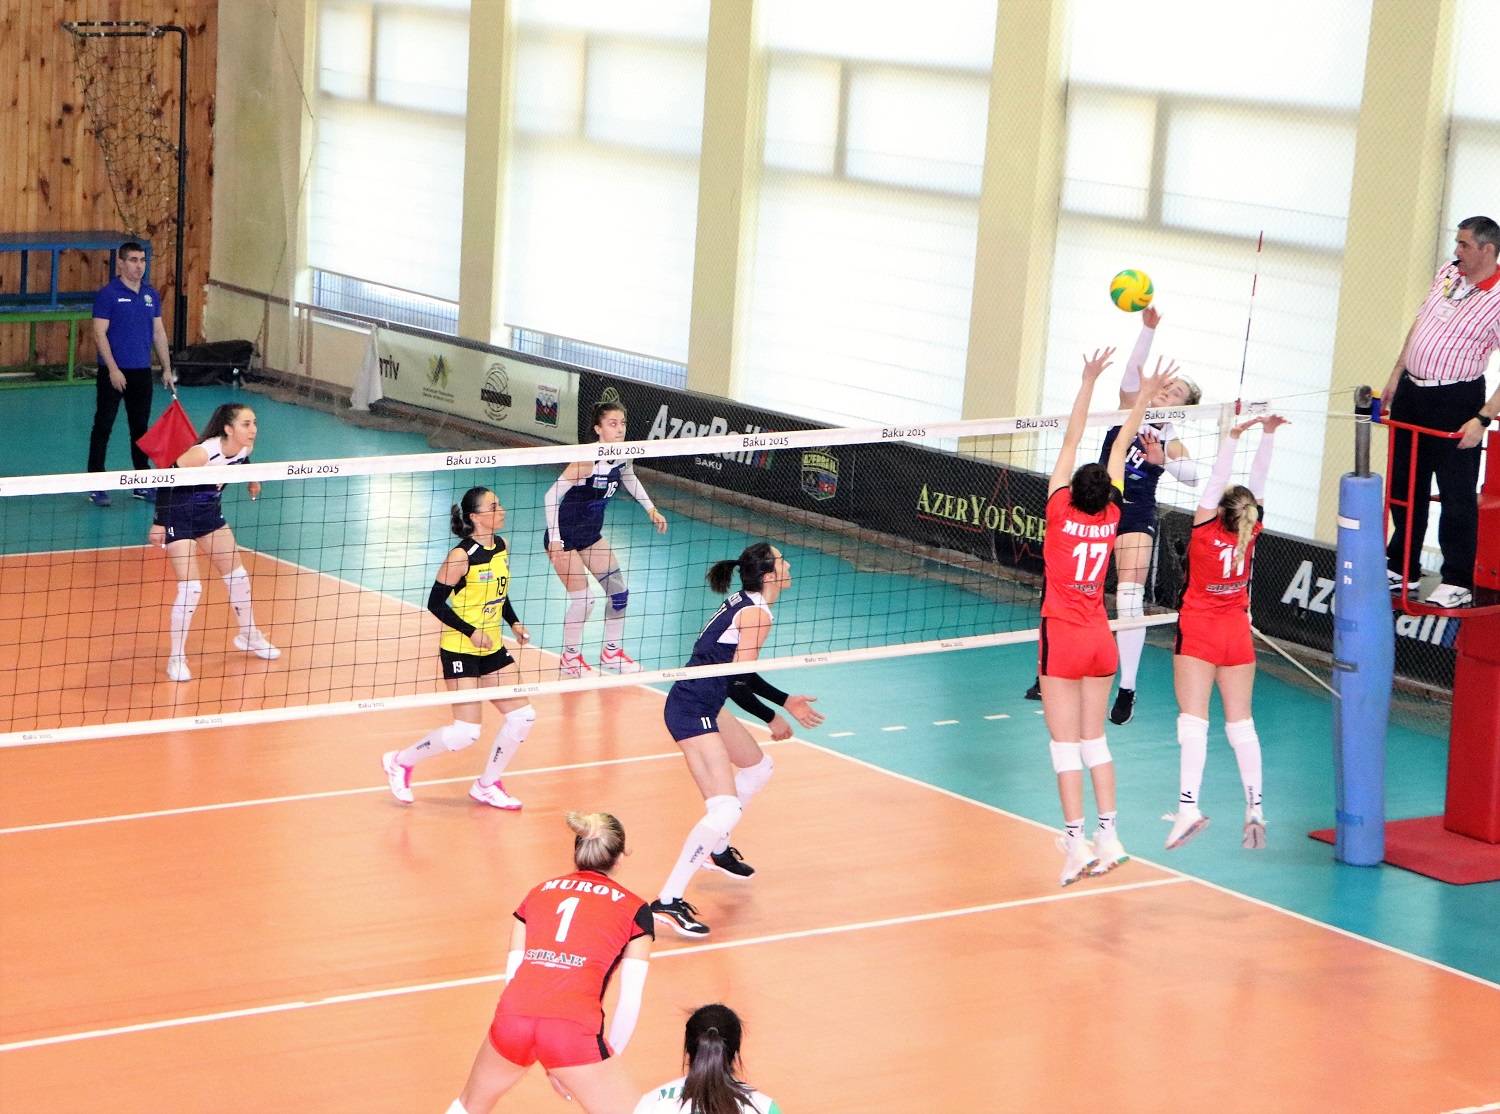 Azerbaijan Volleyball league now available for fans to follow through live streaming InsideCEV